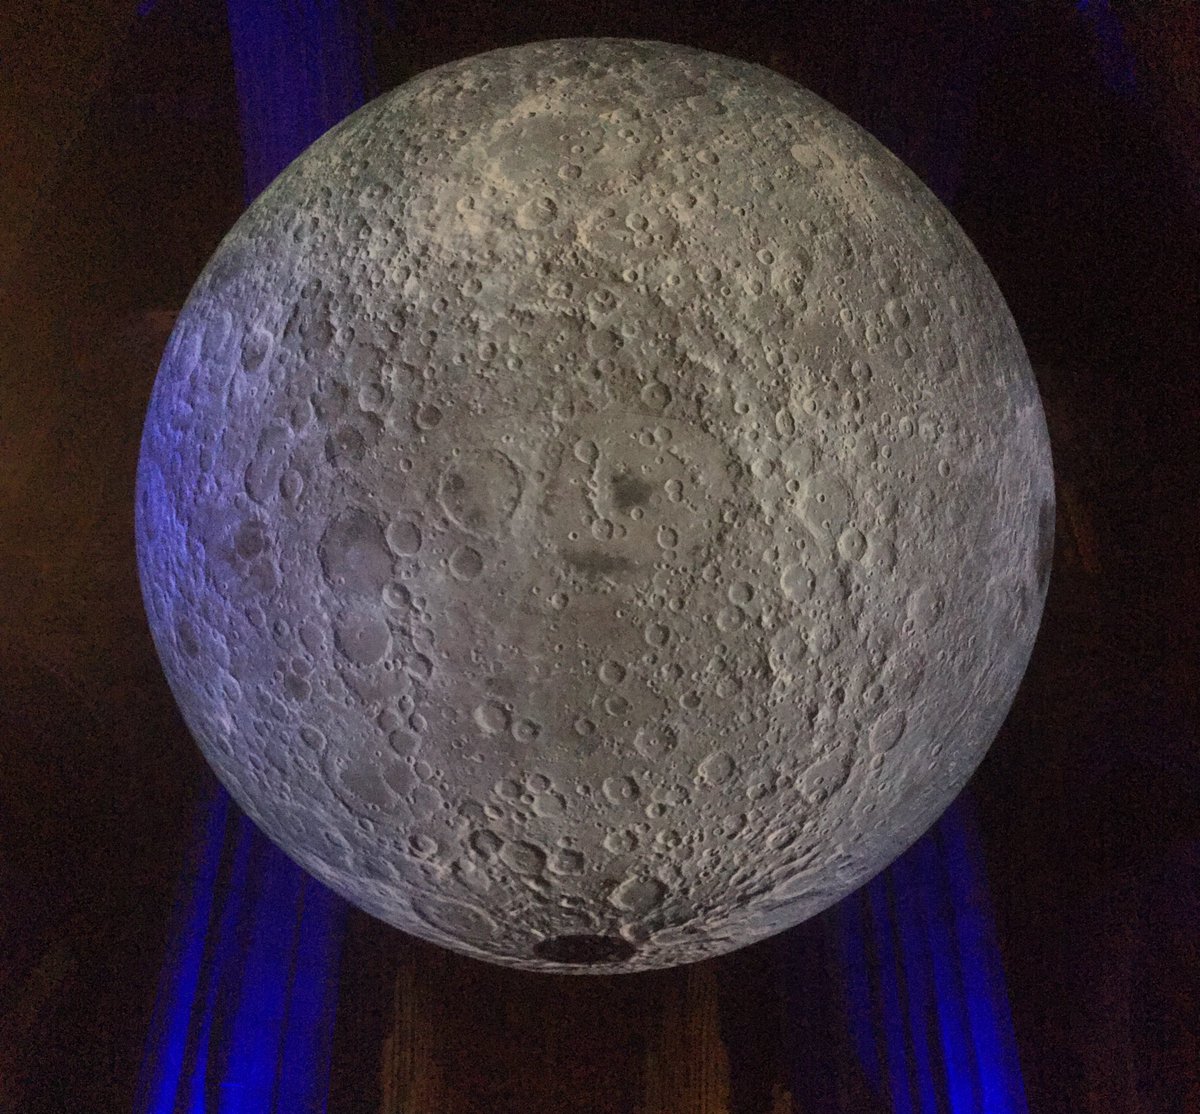 Been to the moon and back tonight #DoncasterMinster #MoonModel